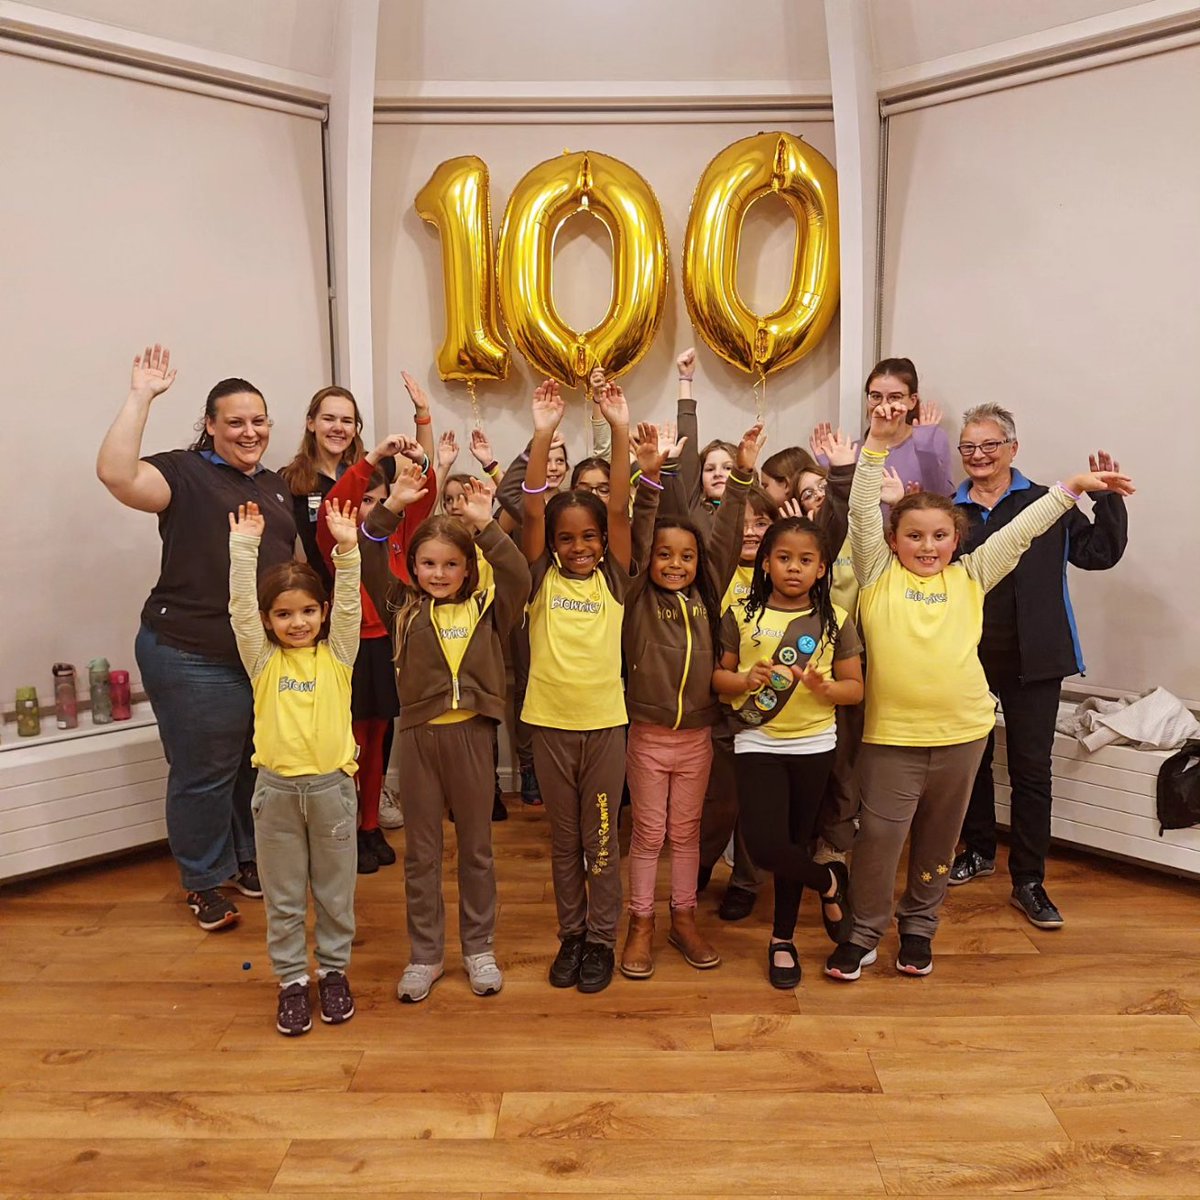 Celebrating 100 years of 10th Clapham Brownies!!!
Lots of fun, laughter, parties, food, celebrations, visitors and memories during this term!!!
#girlscandoanything #100thbirthday #claphamcommon #Brownies #volunteering